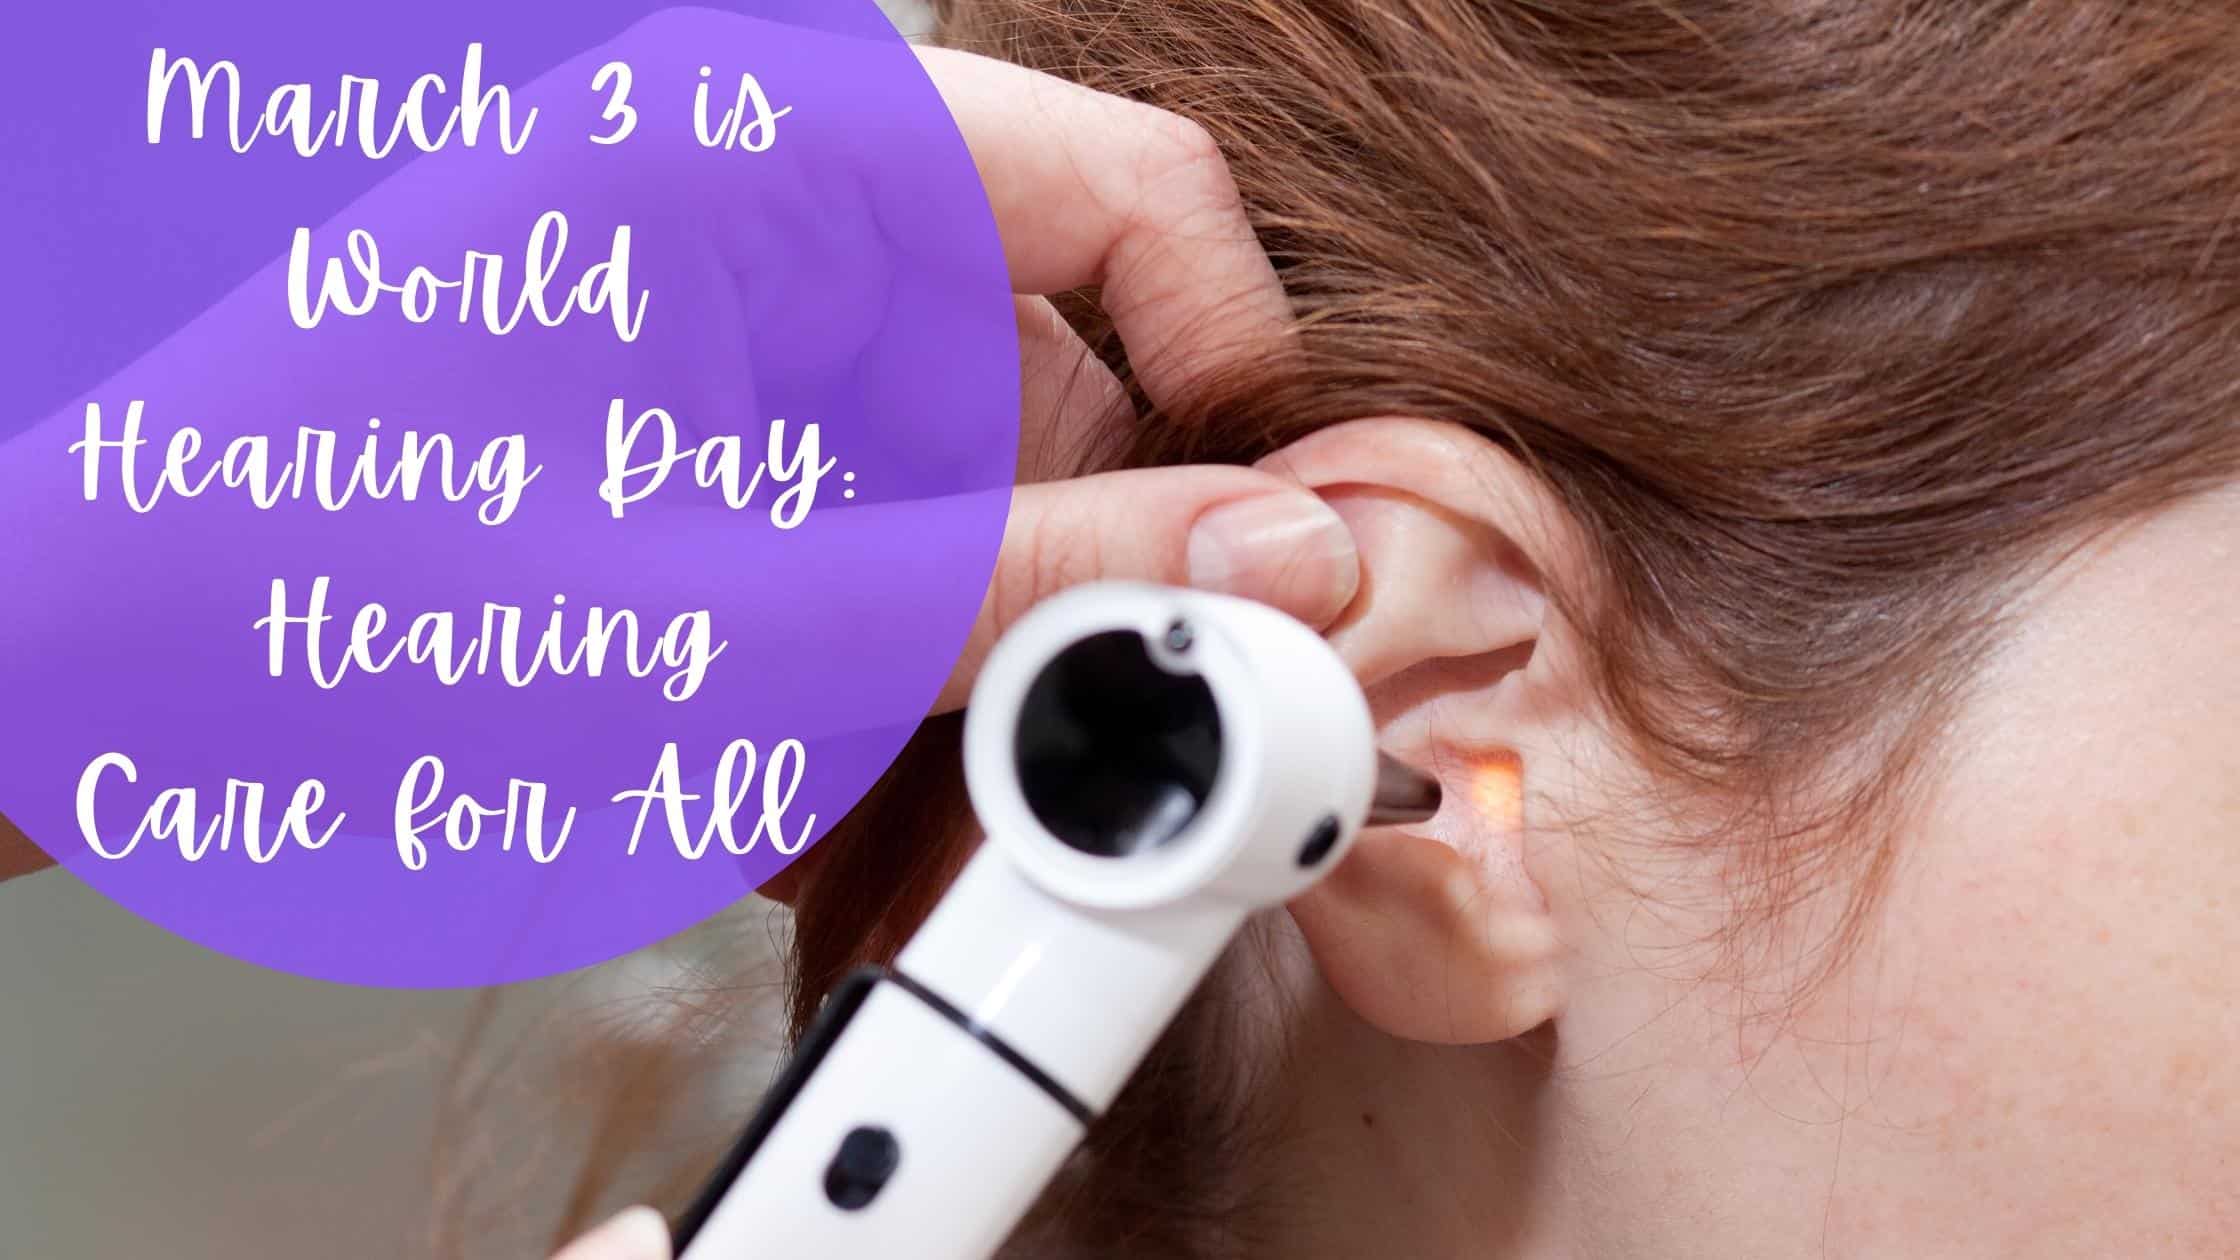 March 3 is World Hearing Day Hearing Care for All